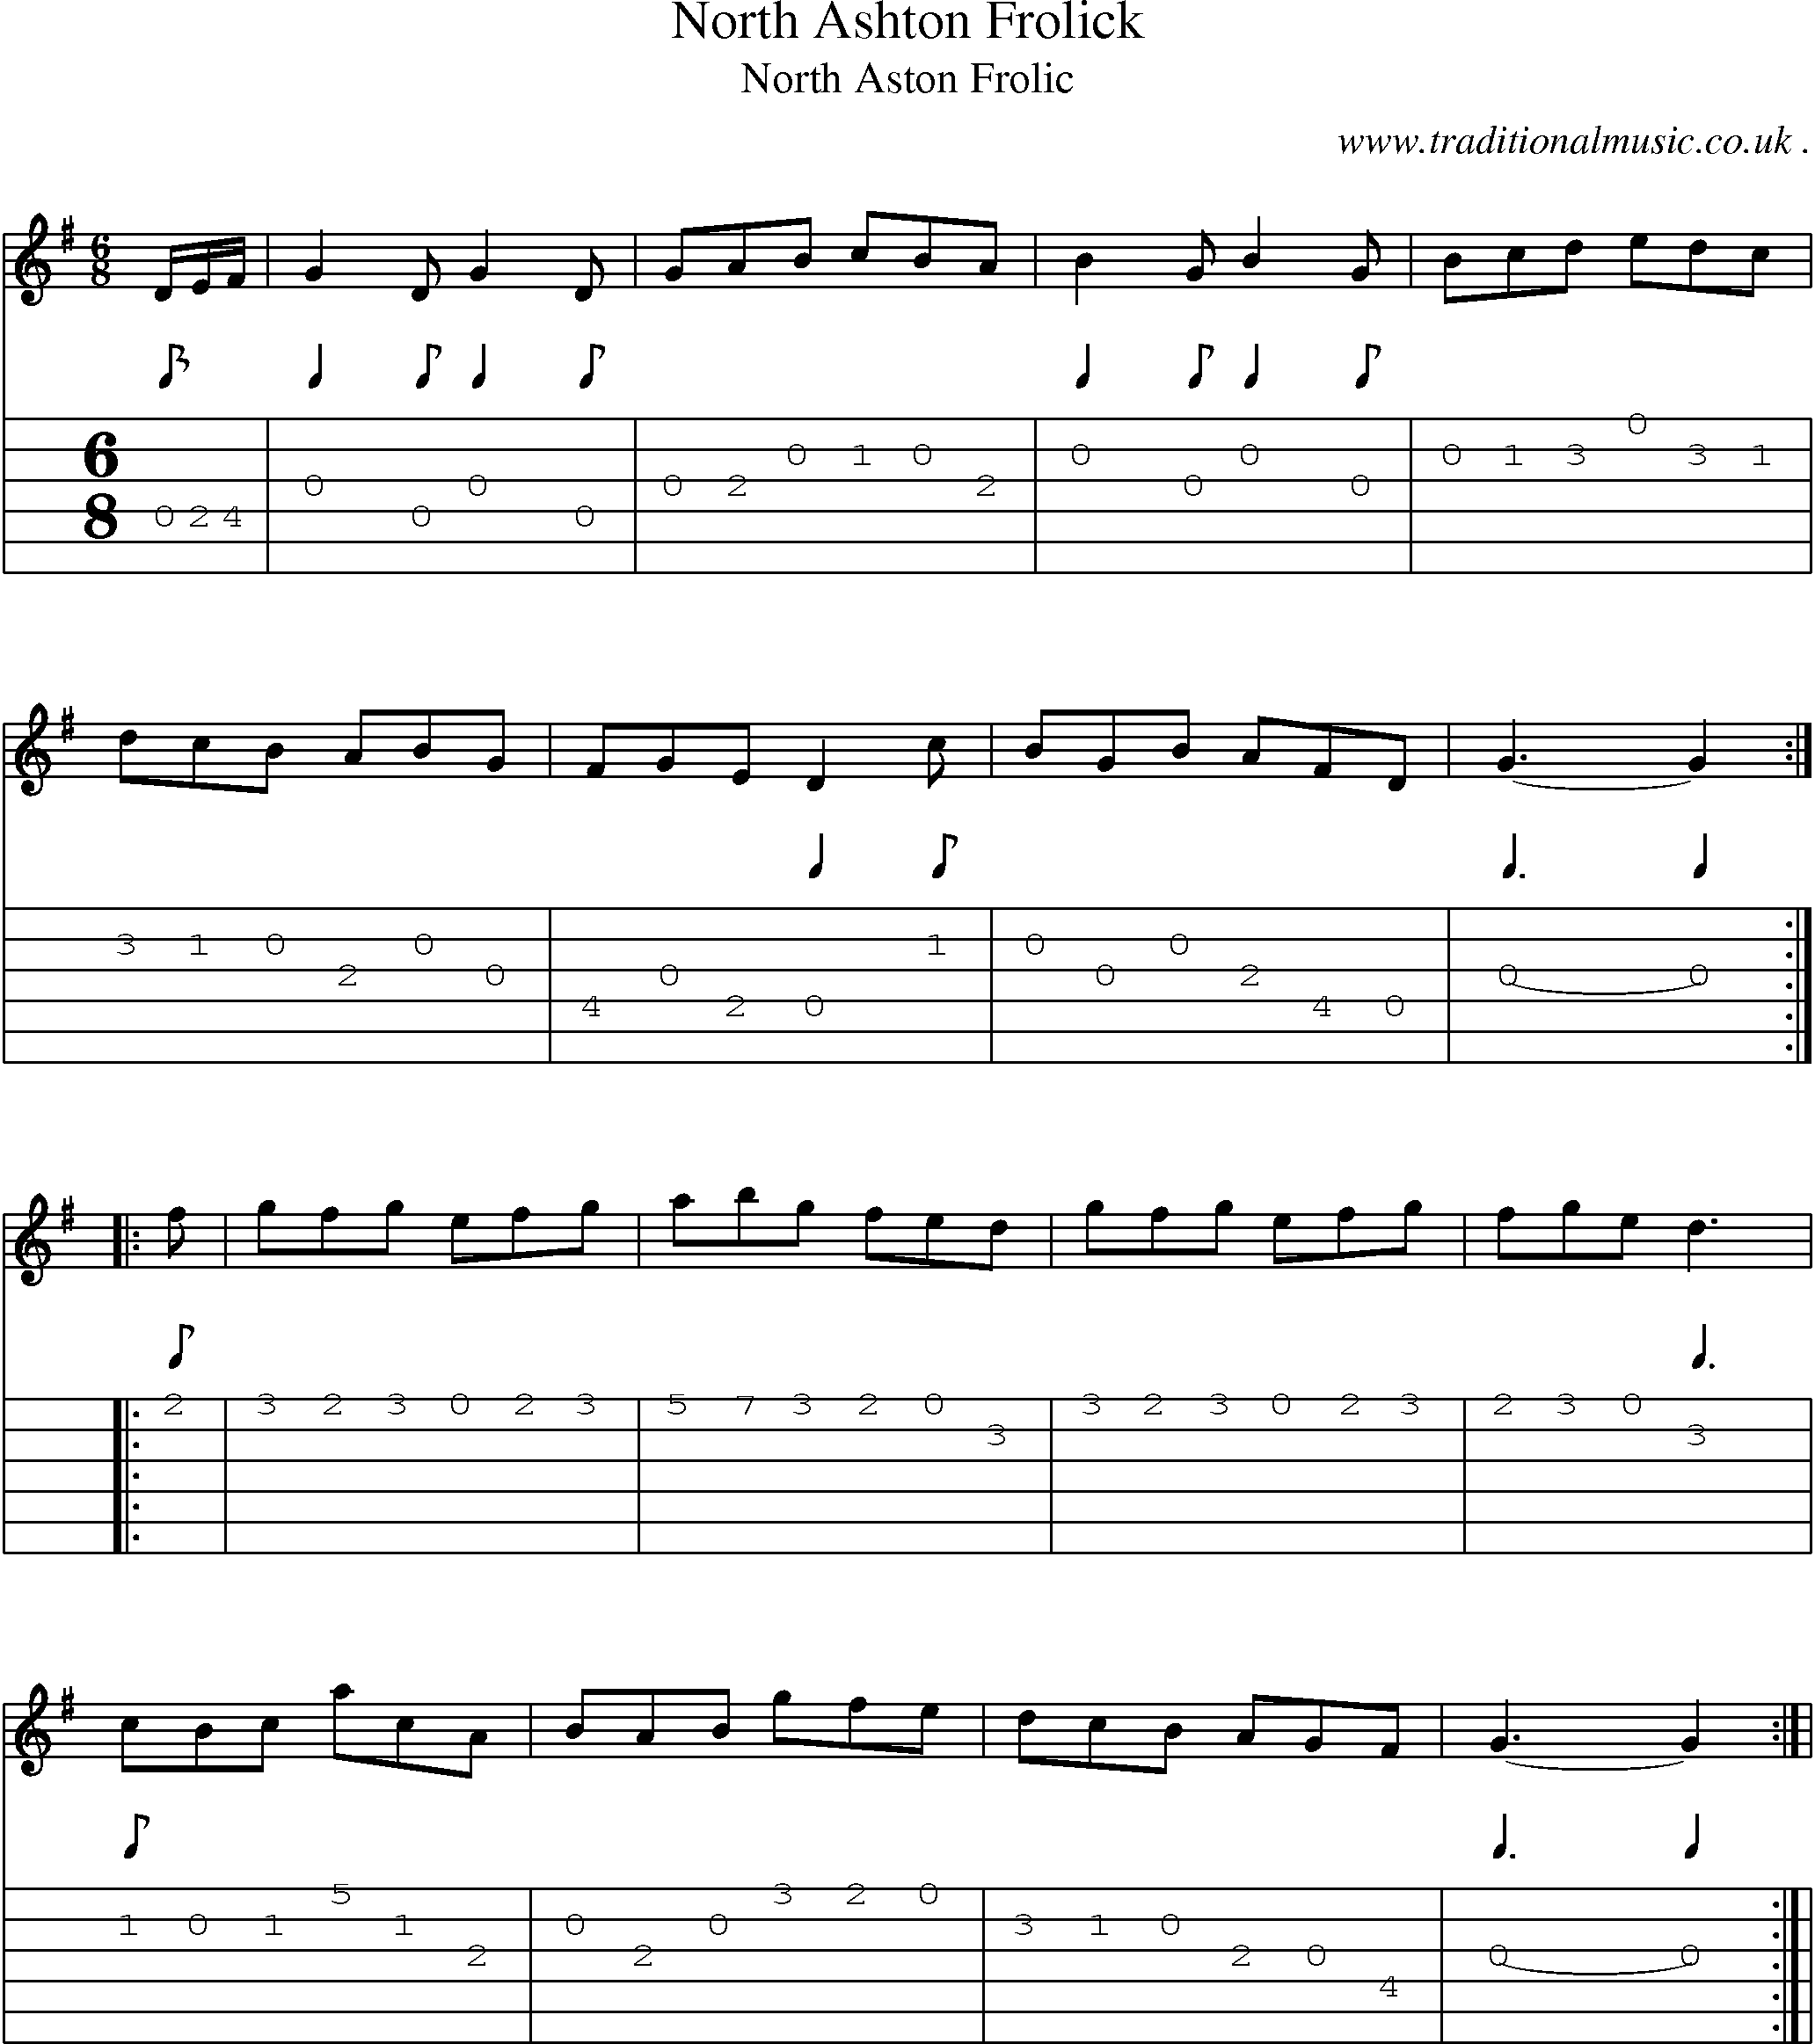 Sheet-Music and Guitar Tabs for North Ashton Frolick